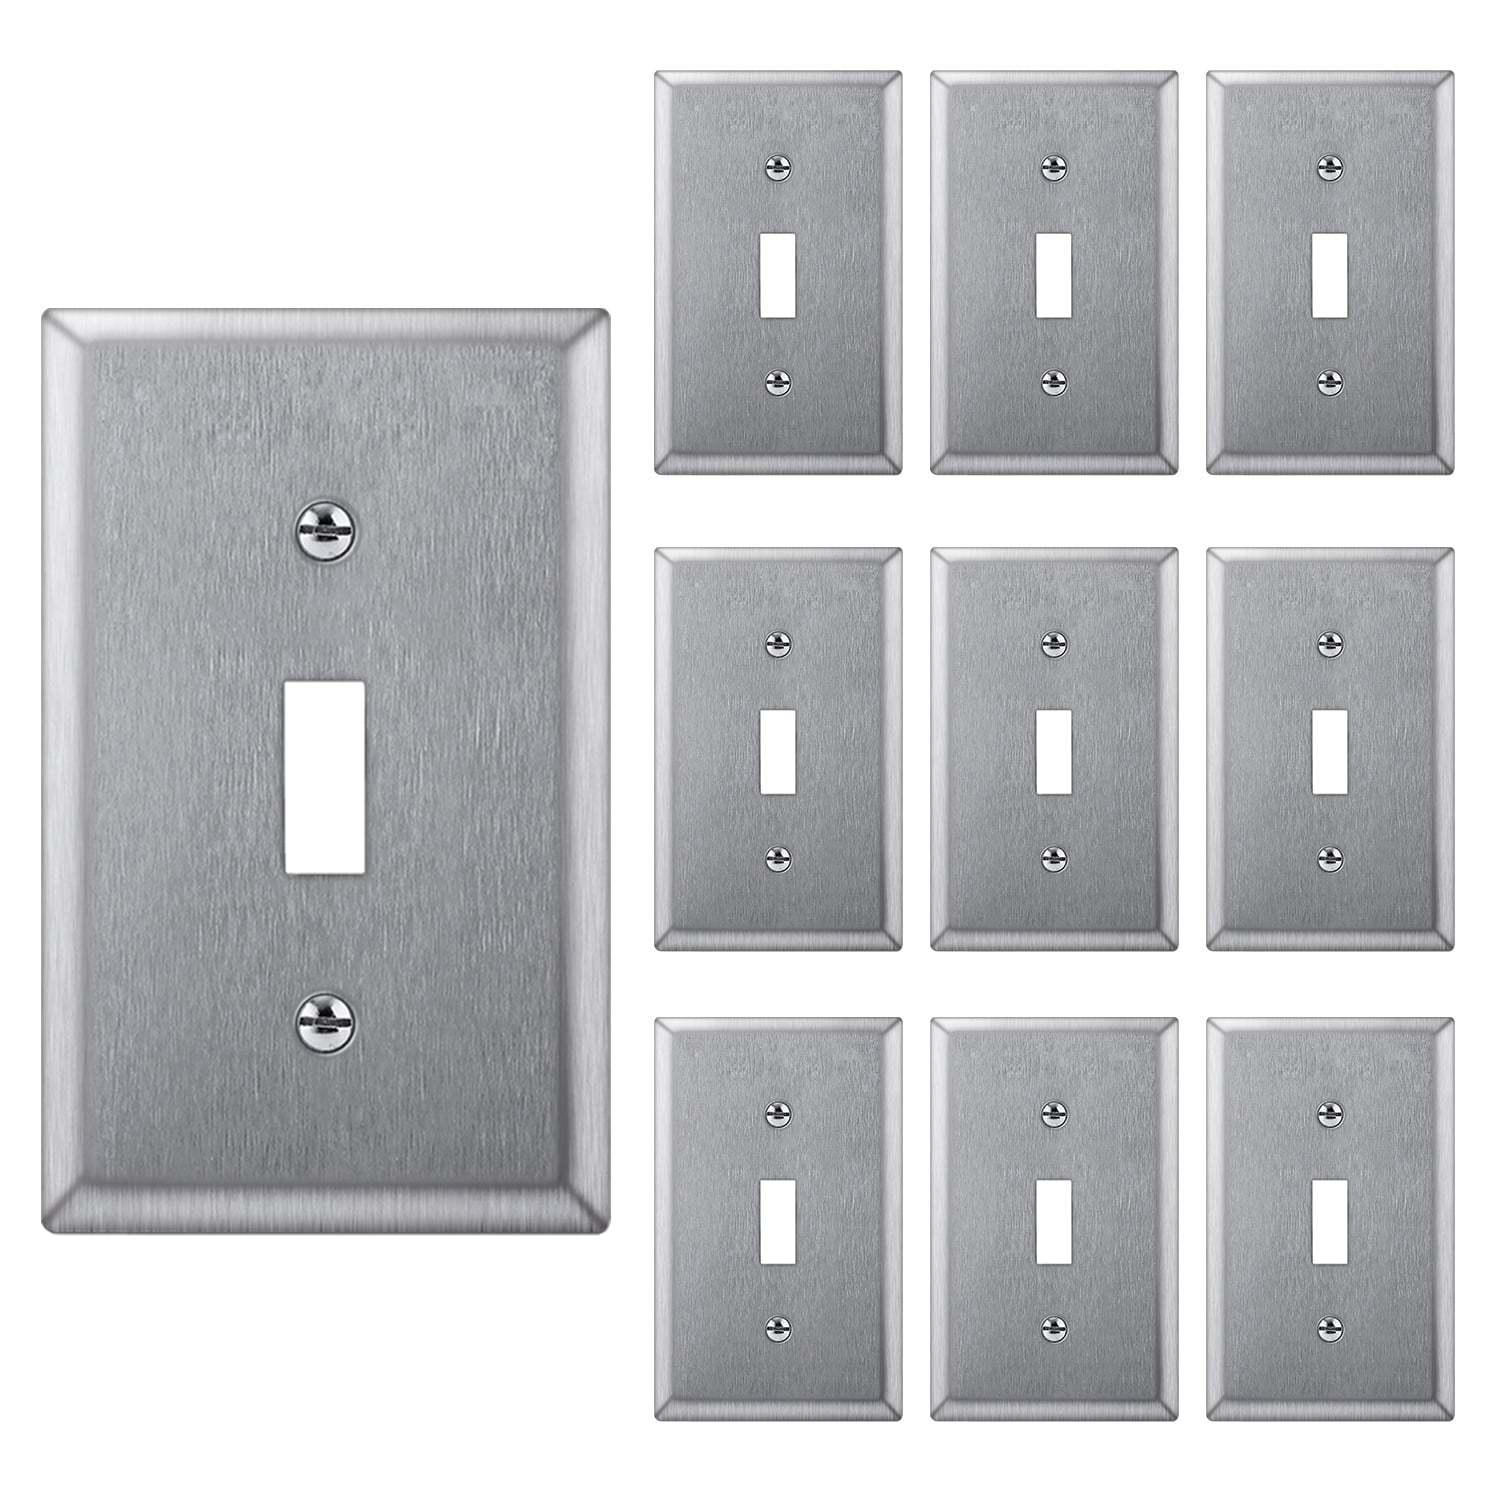 Wall Plate Light Switch Screws 1" 10 screws White color 